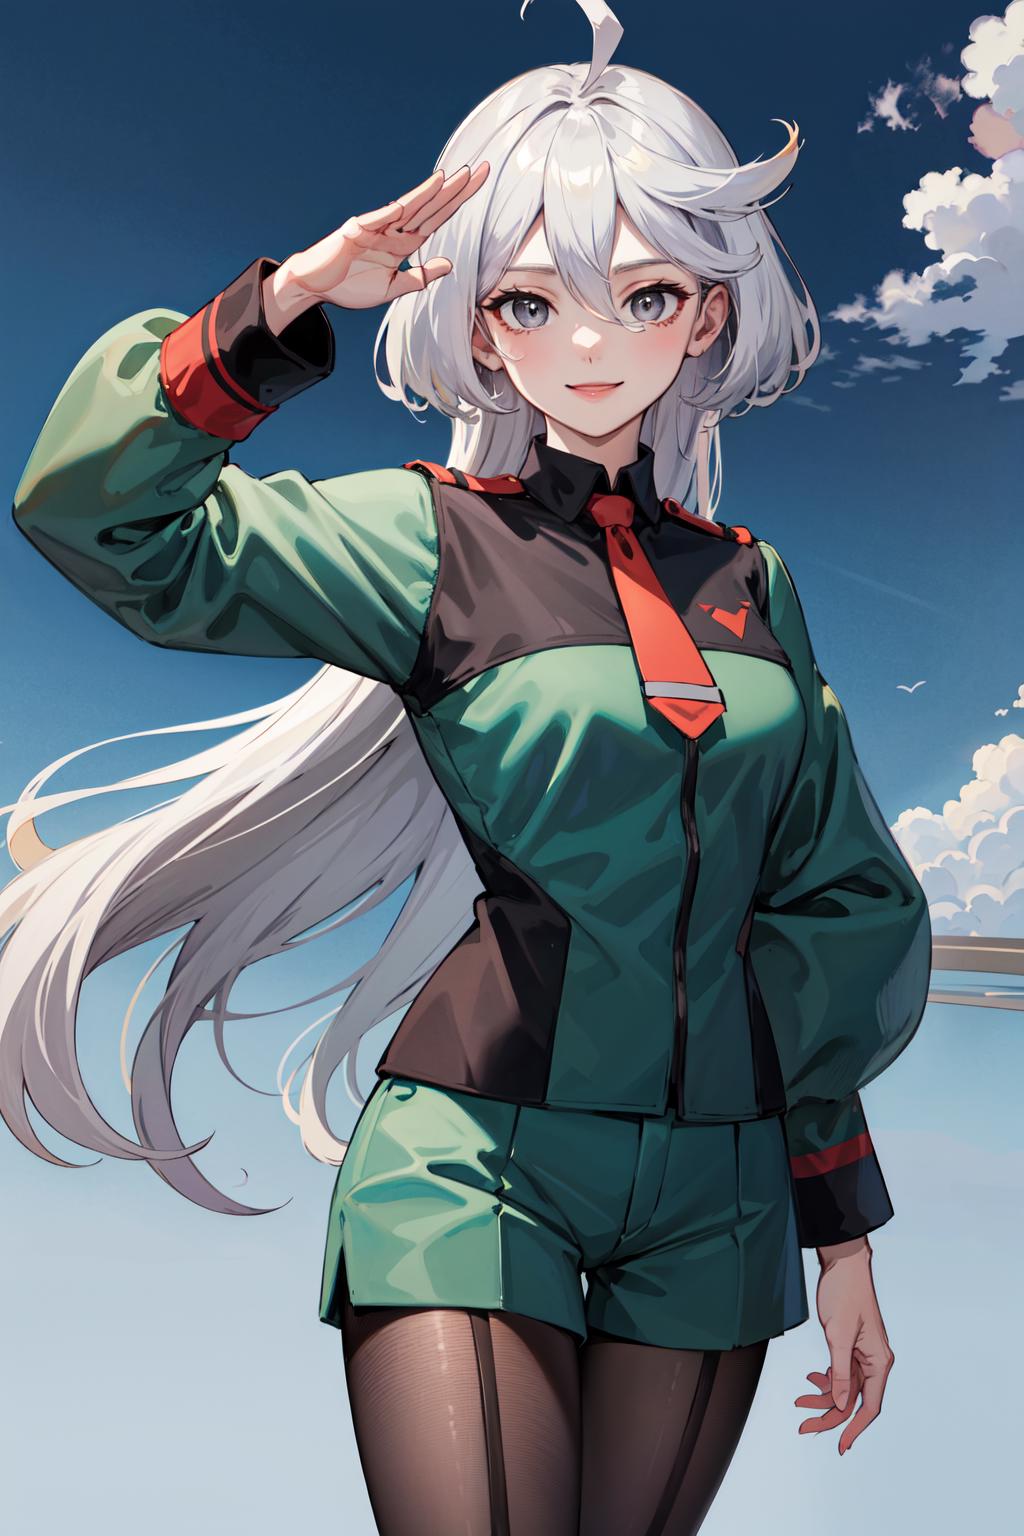 Cartoon Illustration of a Woman in Green Uniform, with Red and Black Accents and White Hair.